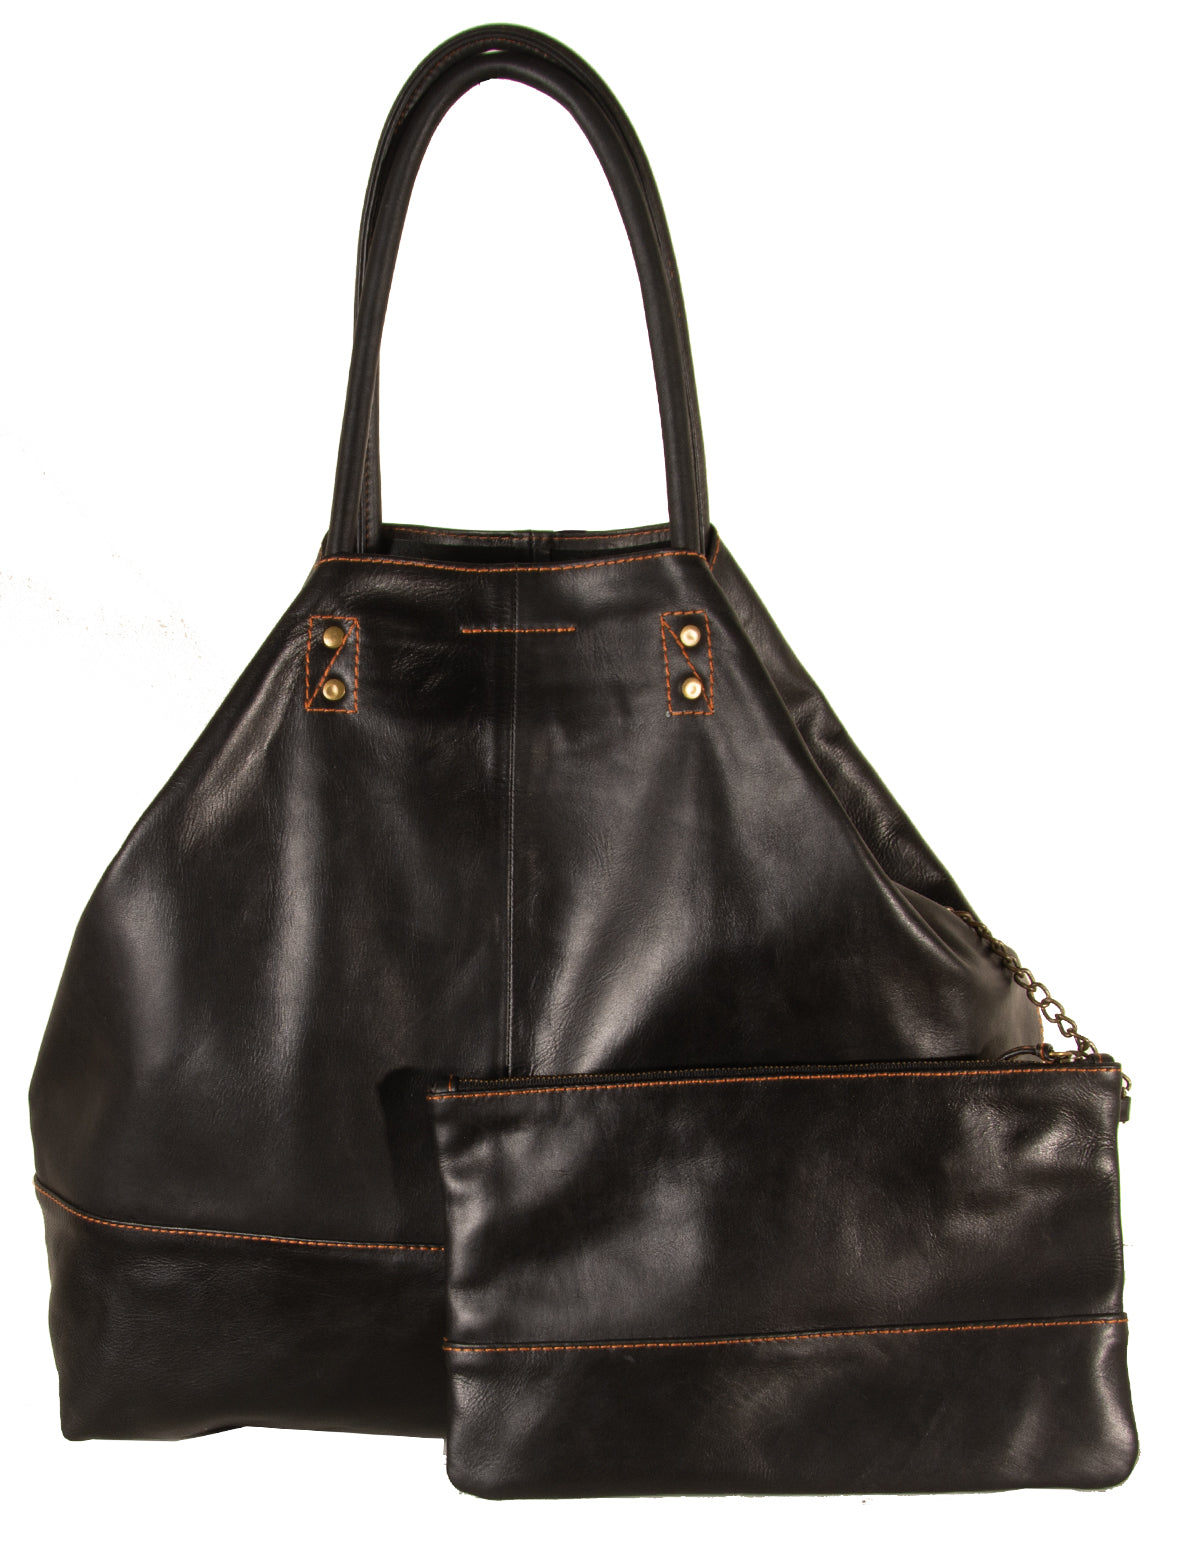 Gail Grande Tote - With Pouch